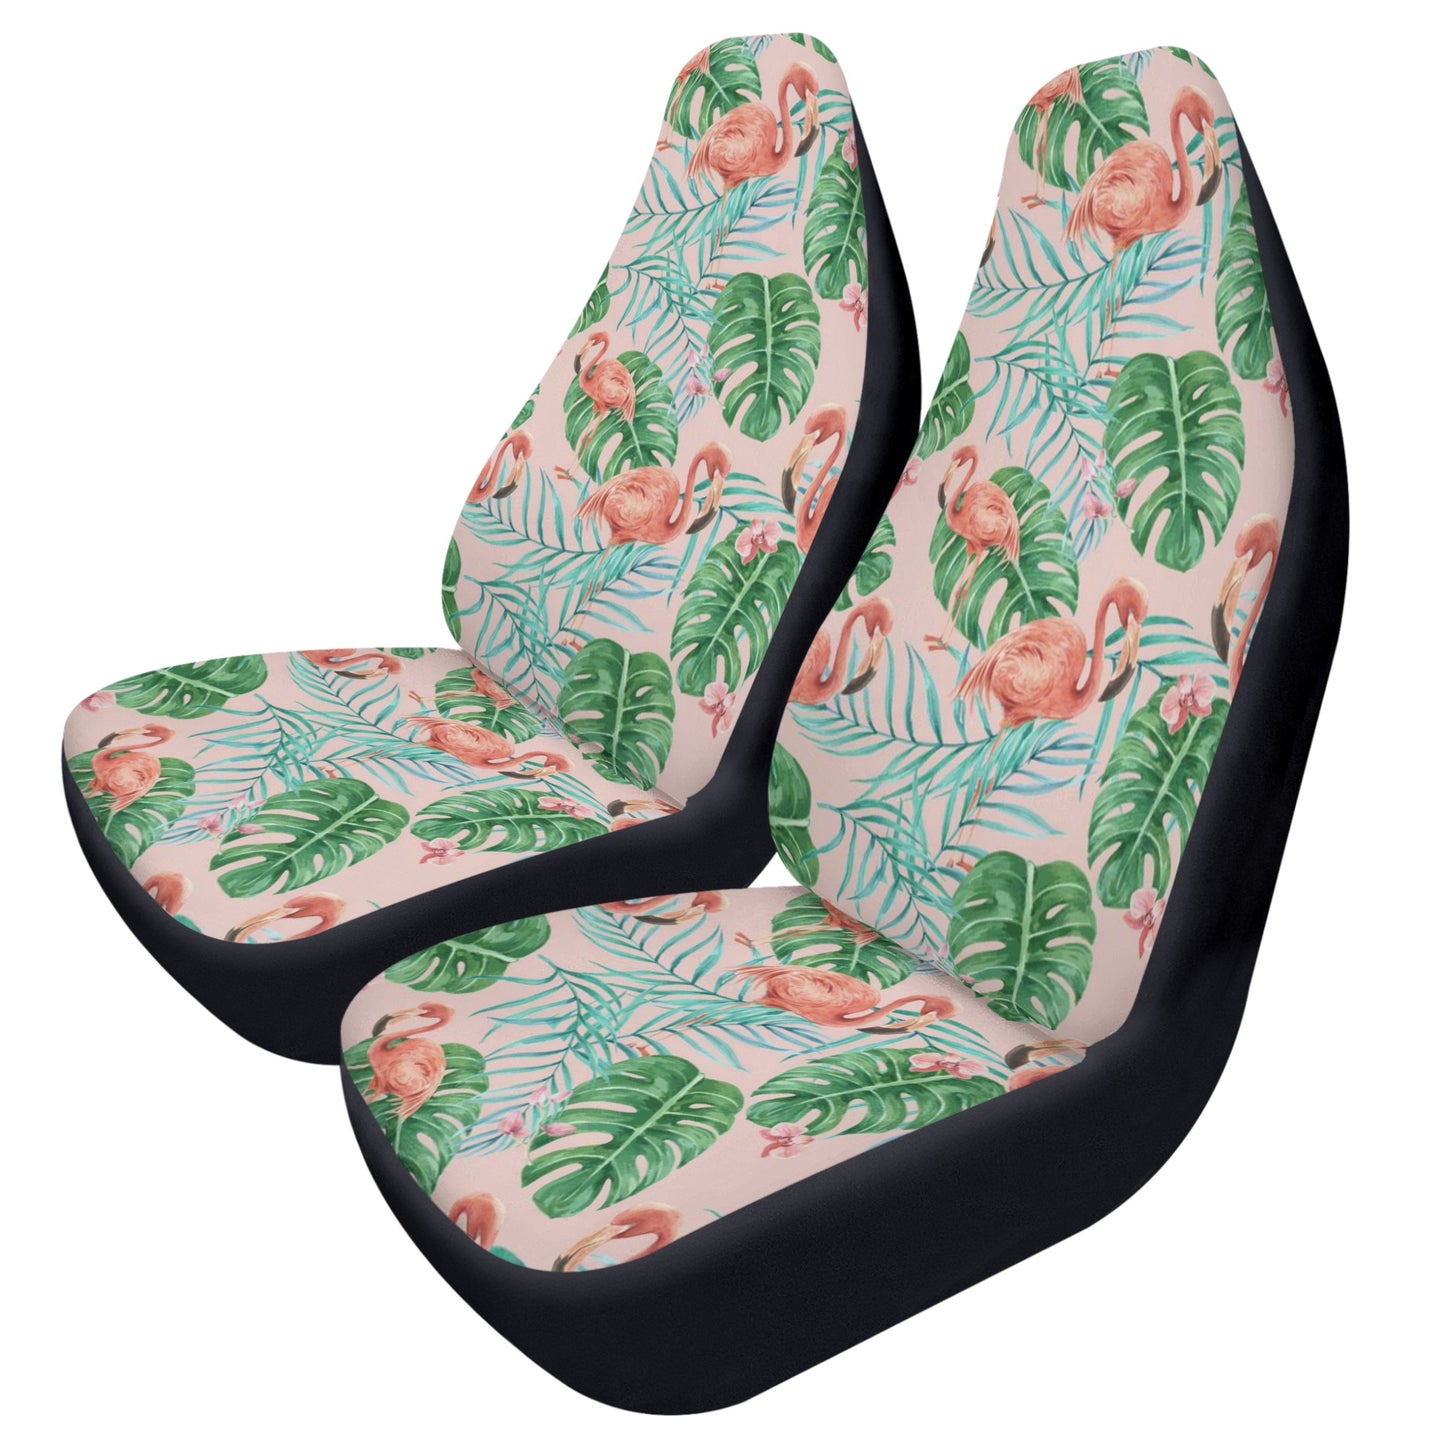 Pink Flamingo Car Seat Covers (2 pcs), Tropical Green Pattern Cute Front Seat Dog Vehicle SUV Universal Protector Accessory Men Women